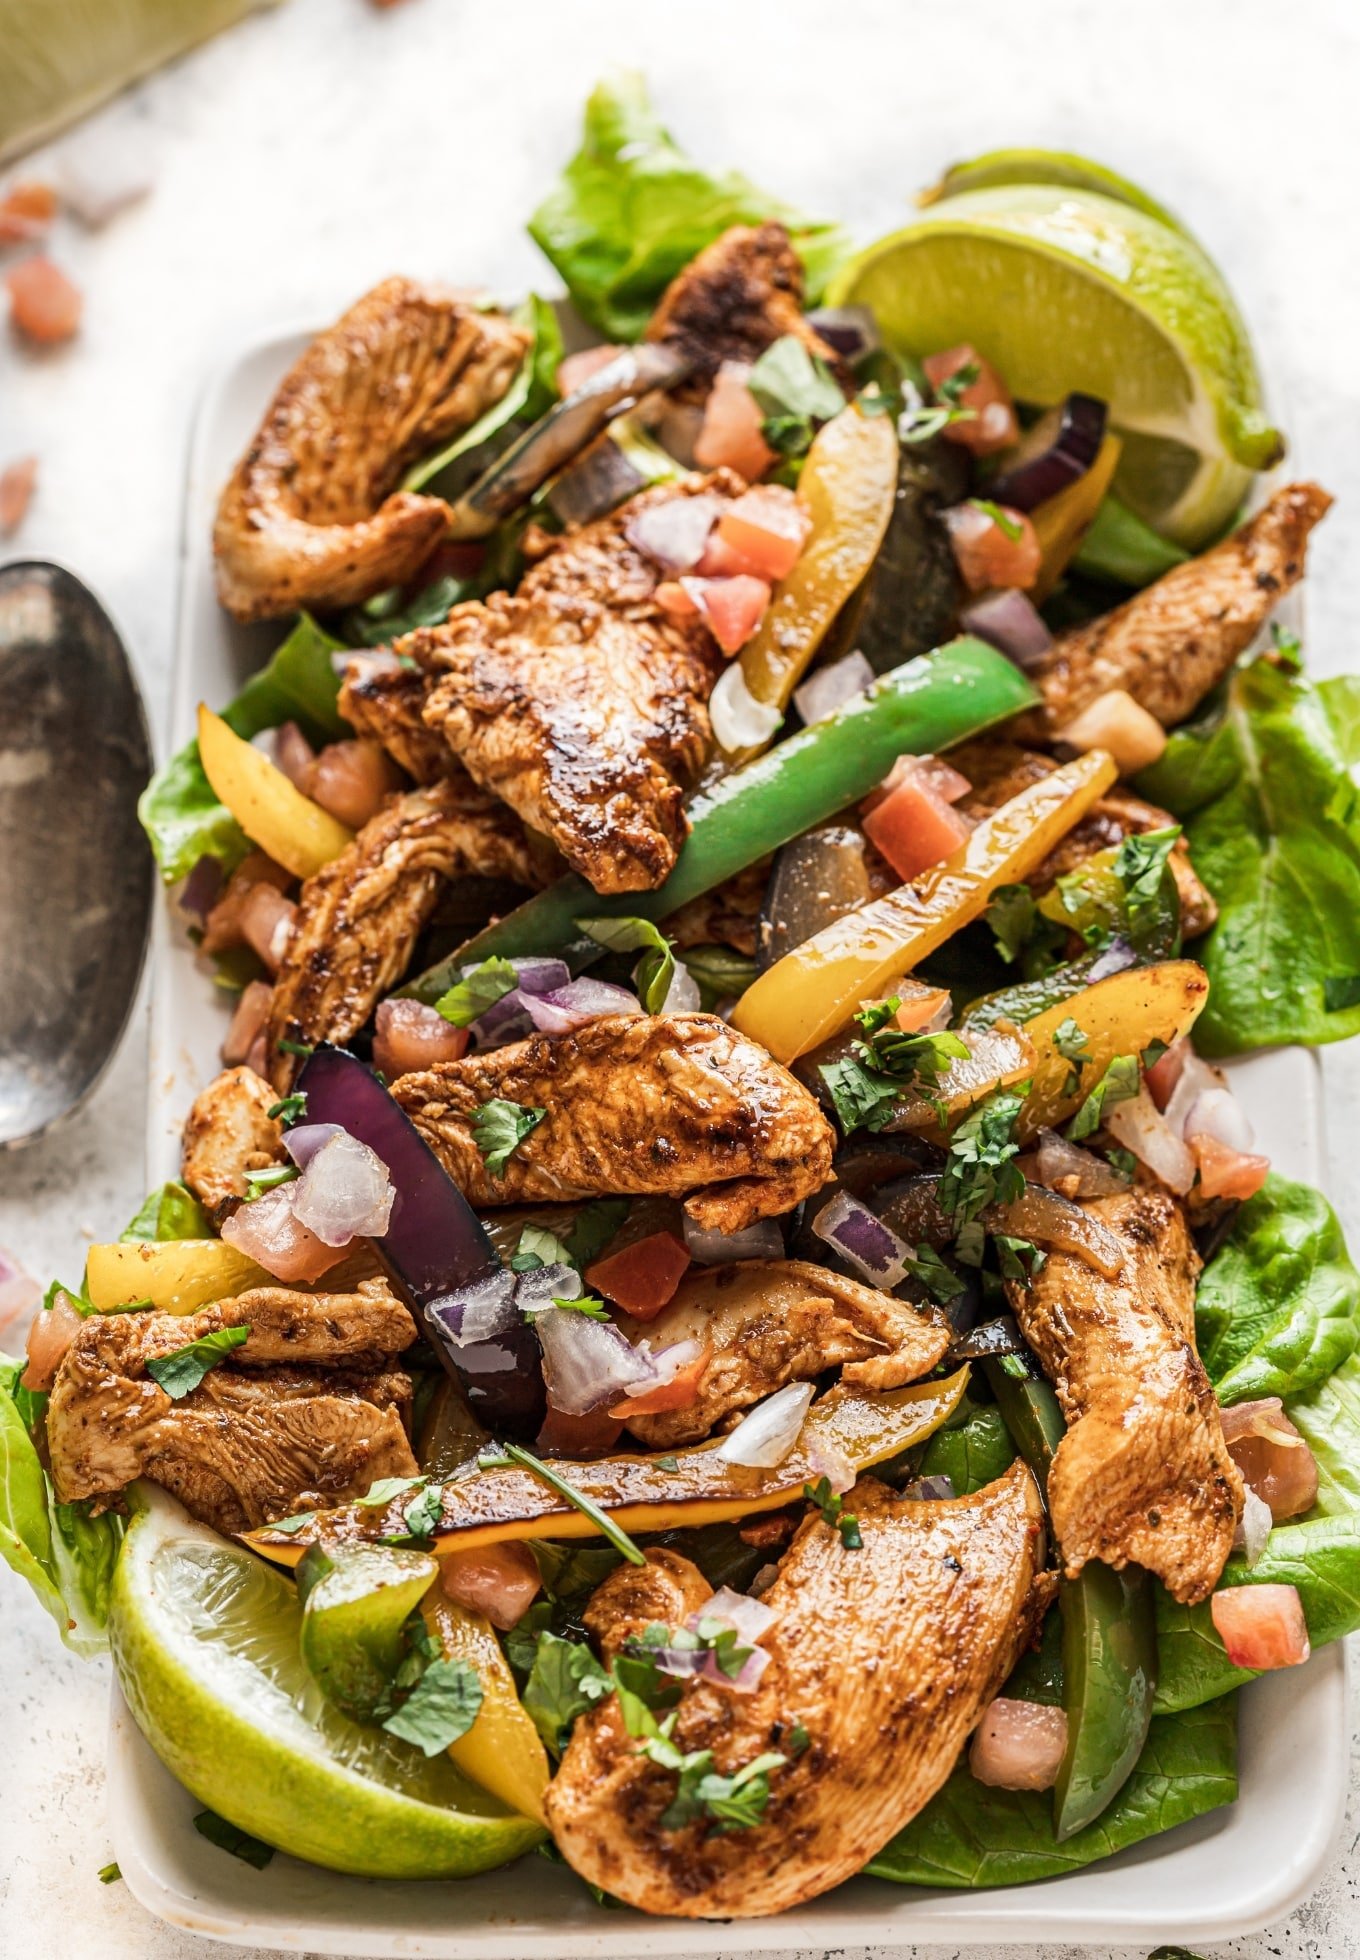 Chile-Lime Skillet Chicken Fajitas (Seriously Quick & Easy!)